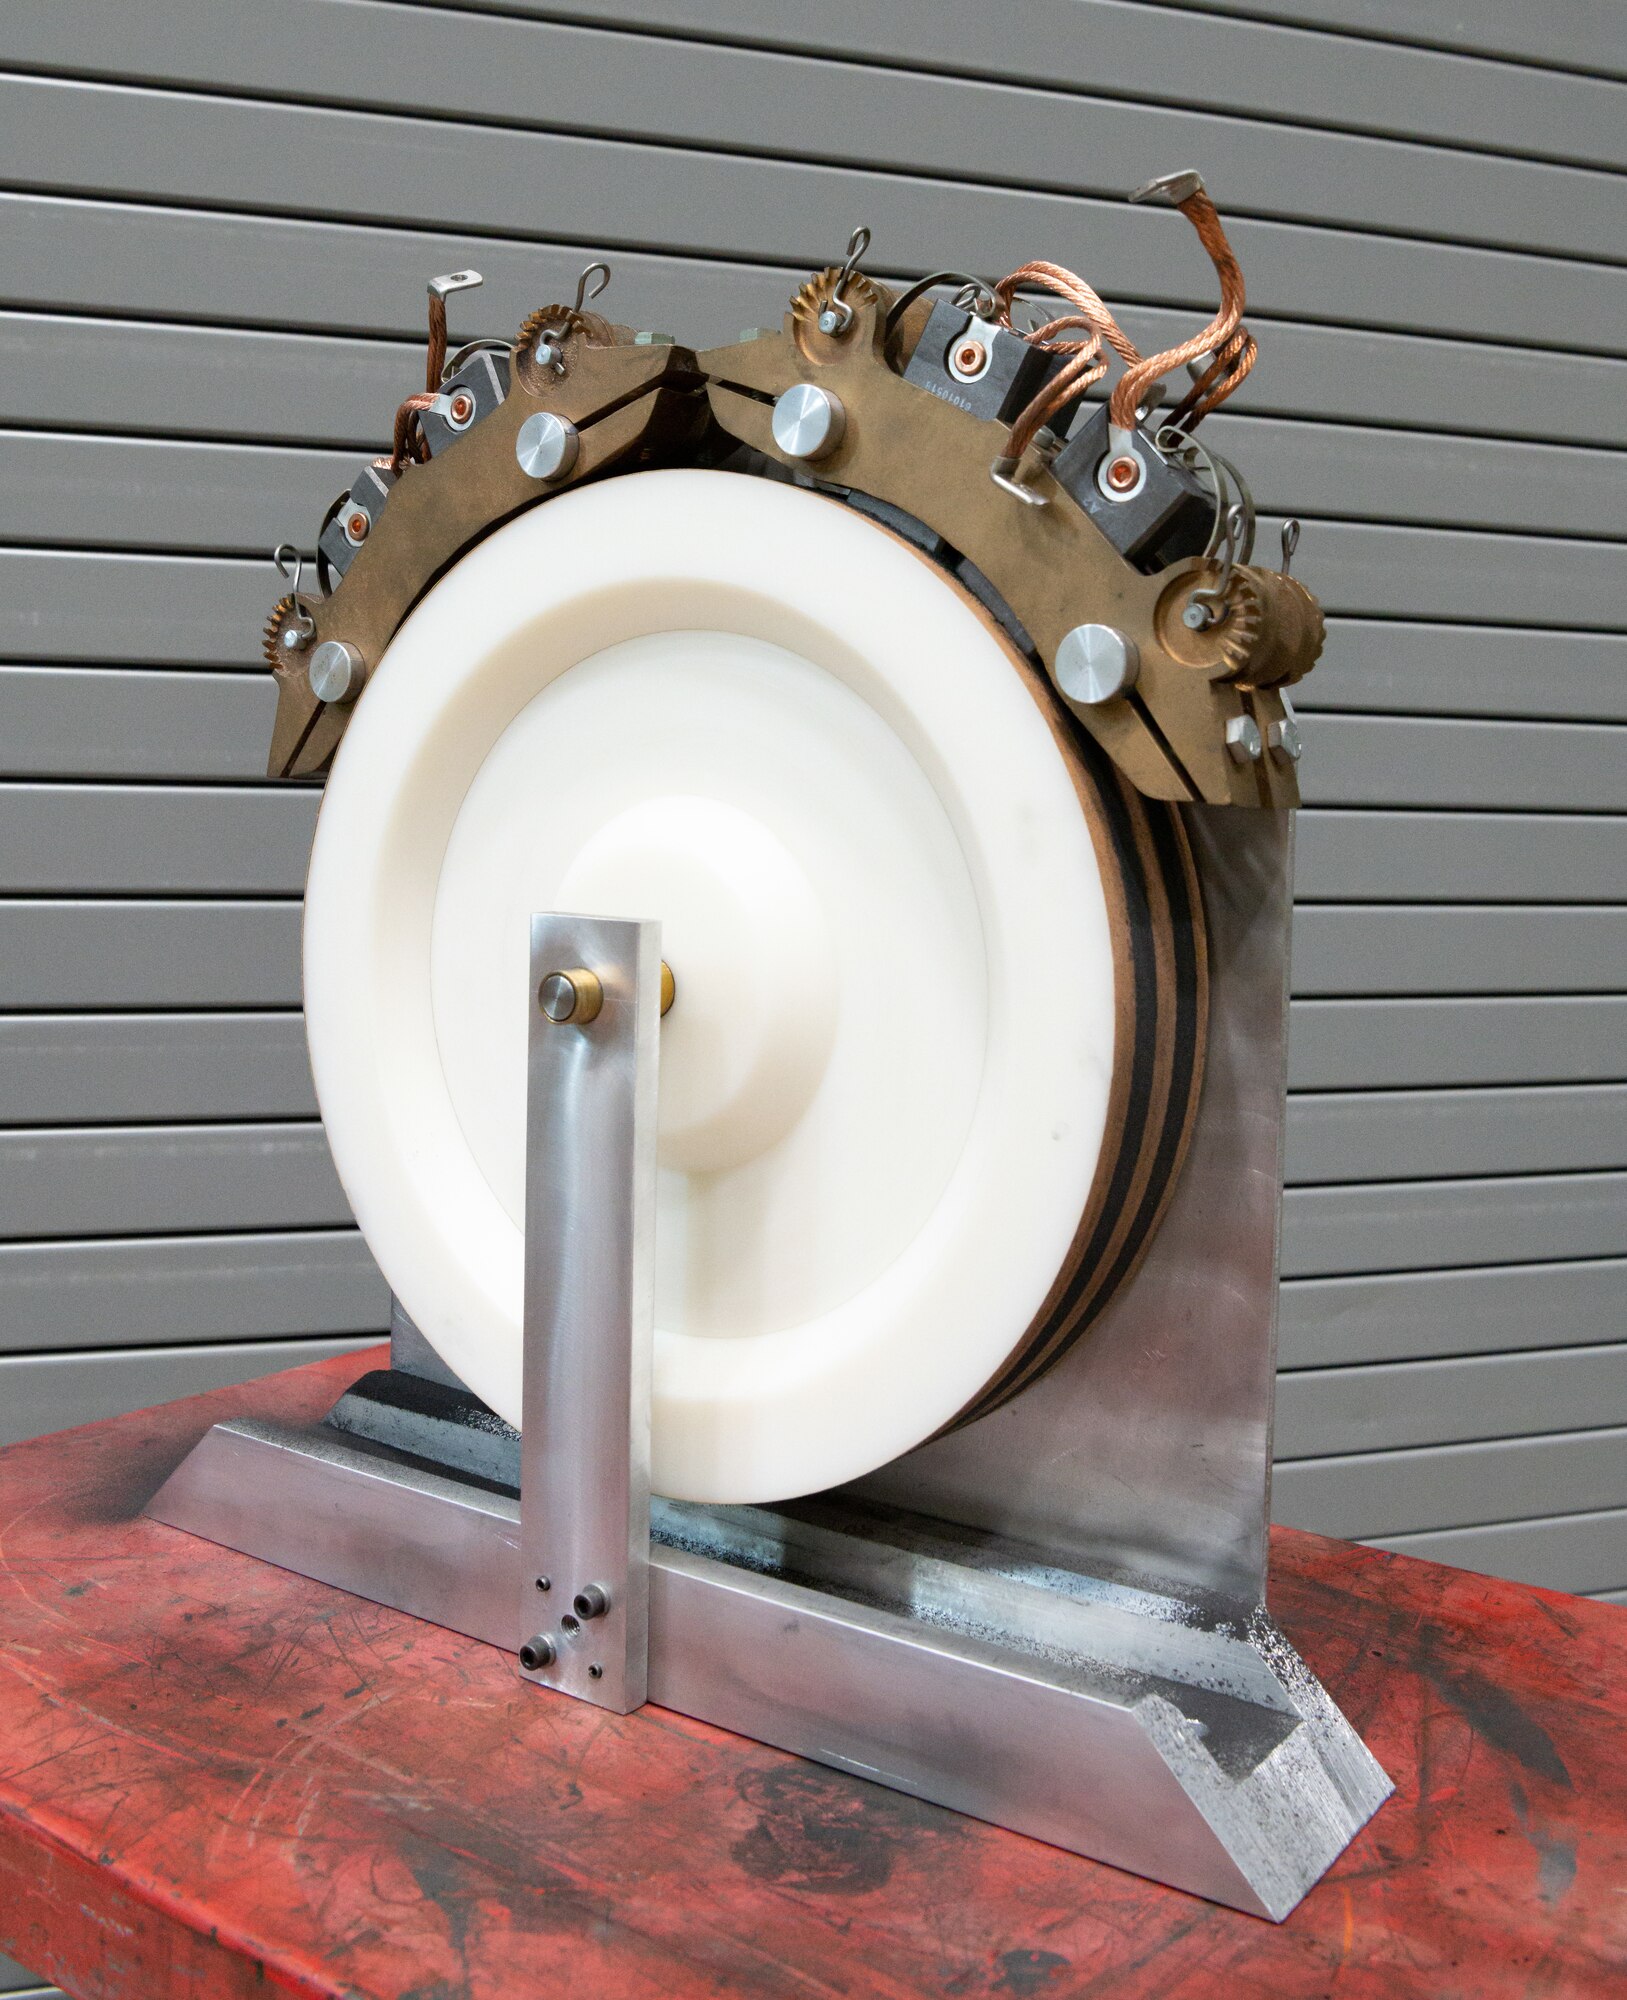 A device, shown here, developed by Arnold Engineering Development Complex employees to surface motor brushes.